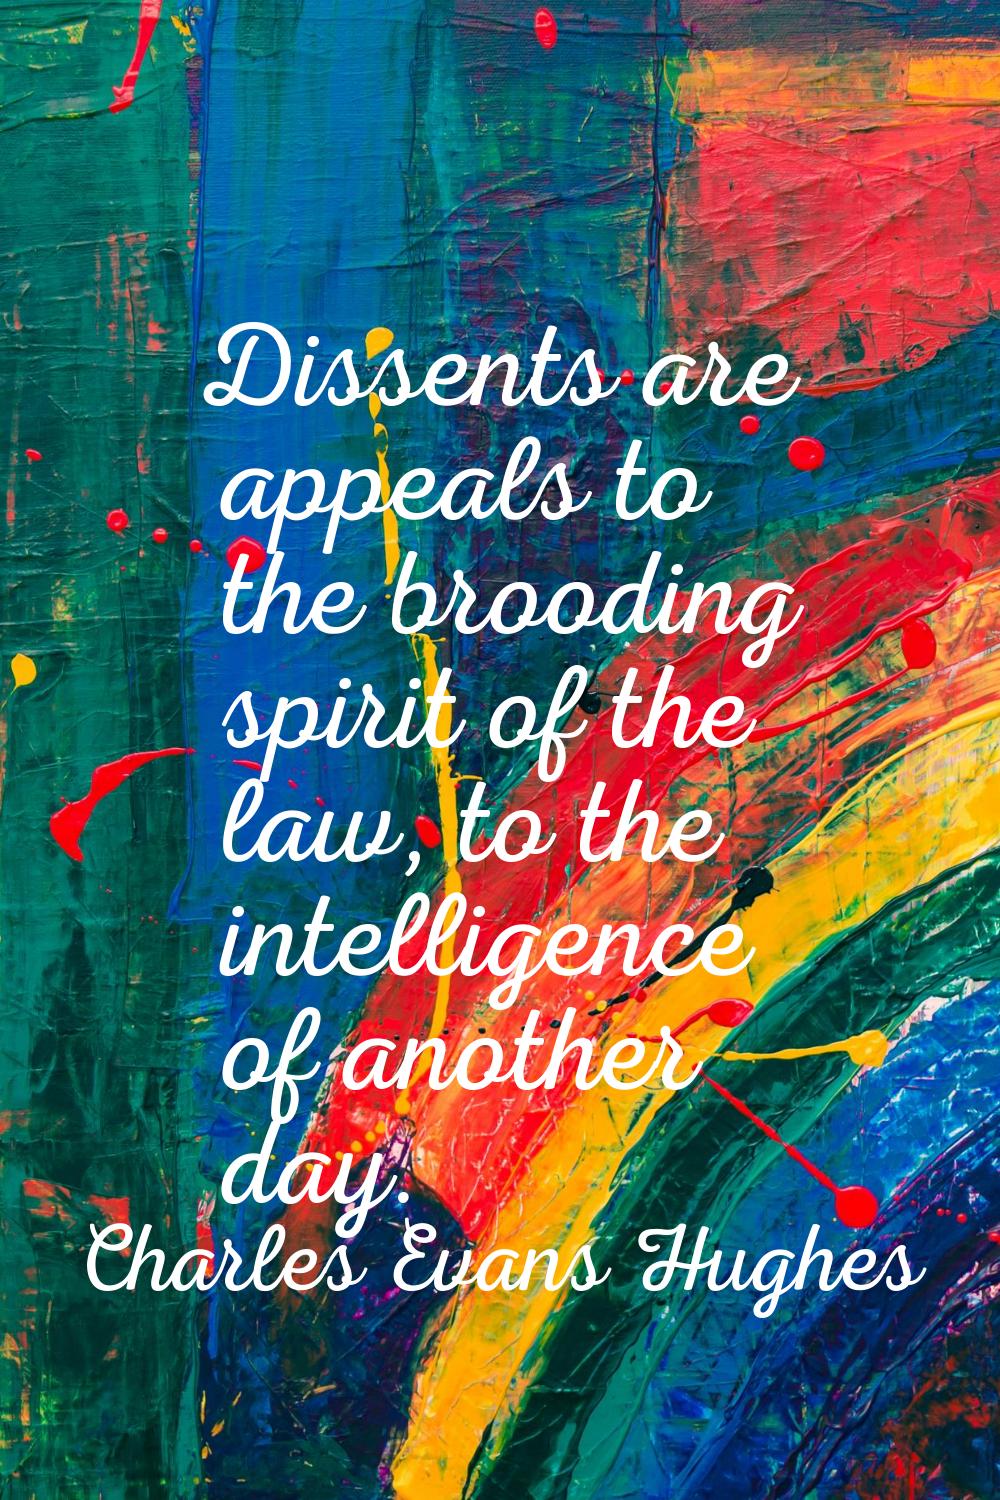 Dissents are appeals to the brooding spirit of the law, to the intelligence of another day.